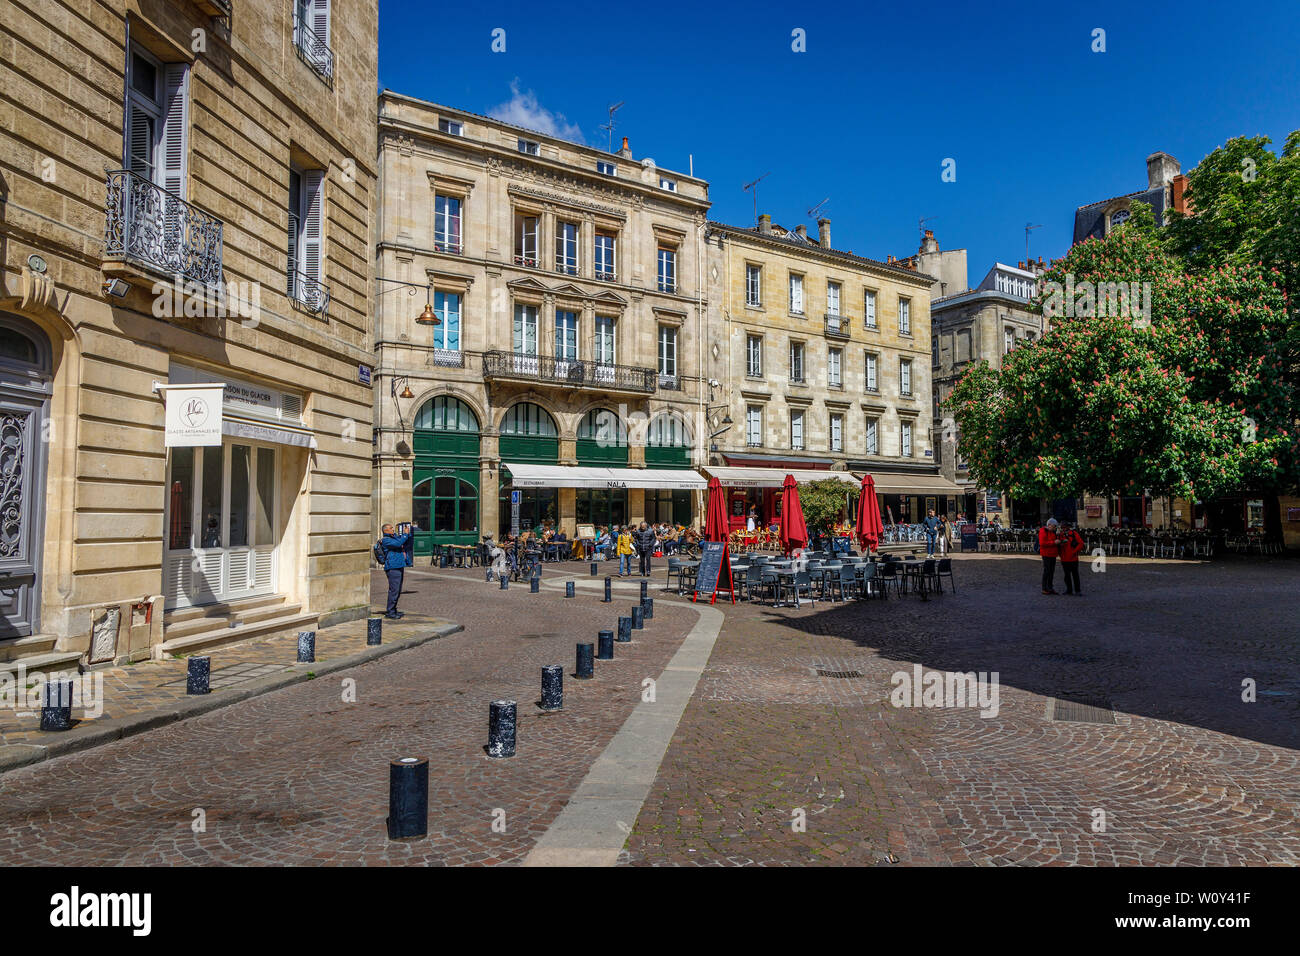 Place Saint-Pierre, pedestrianised area with cafes and restaurants in Bordeux, Gironde, France. Stock Photo